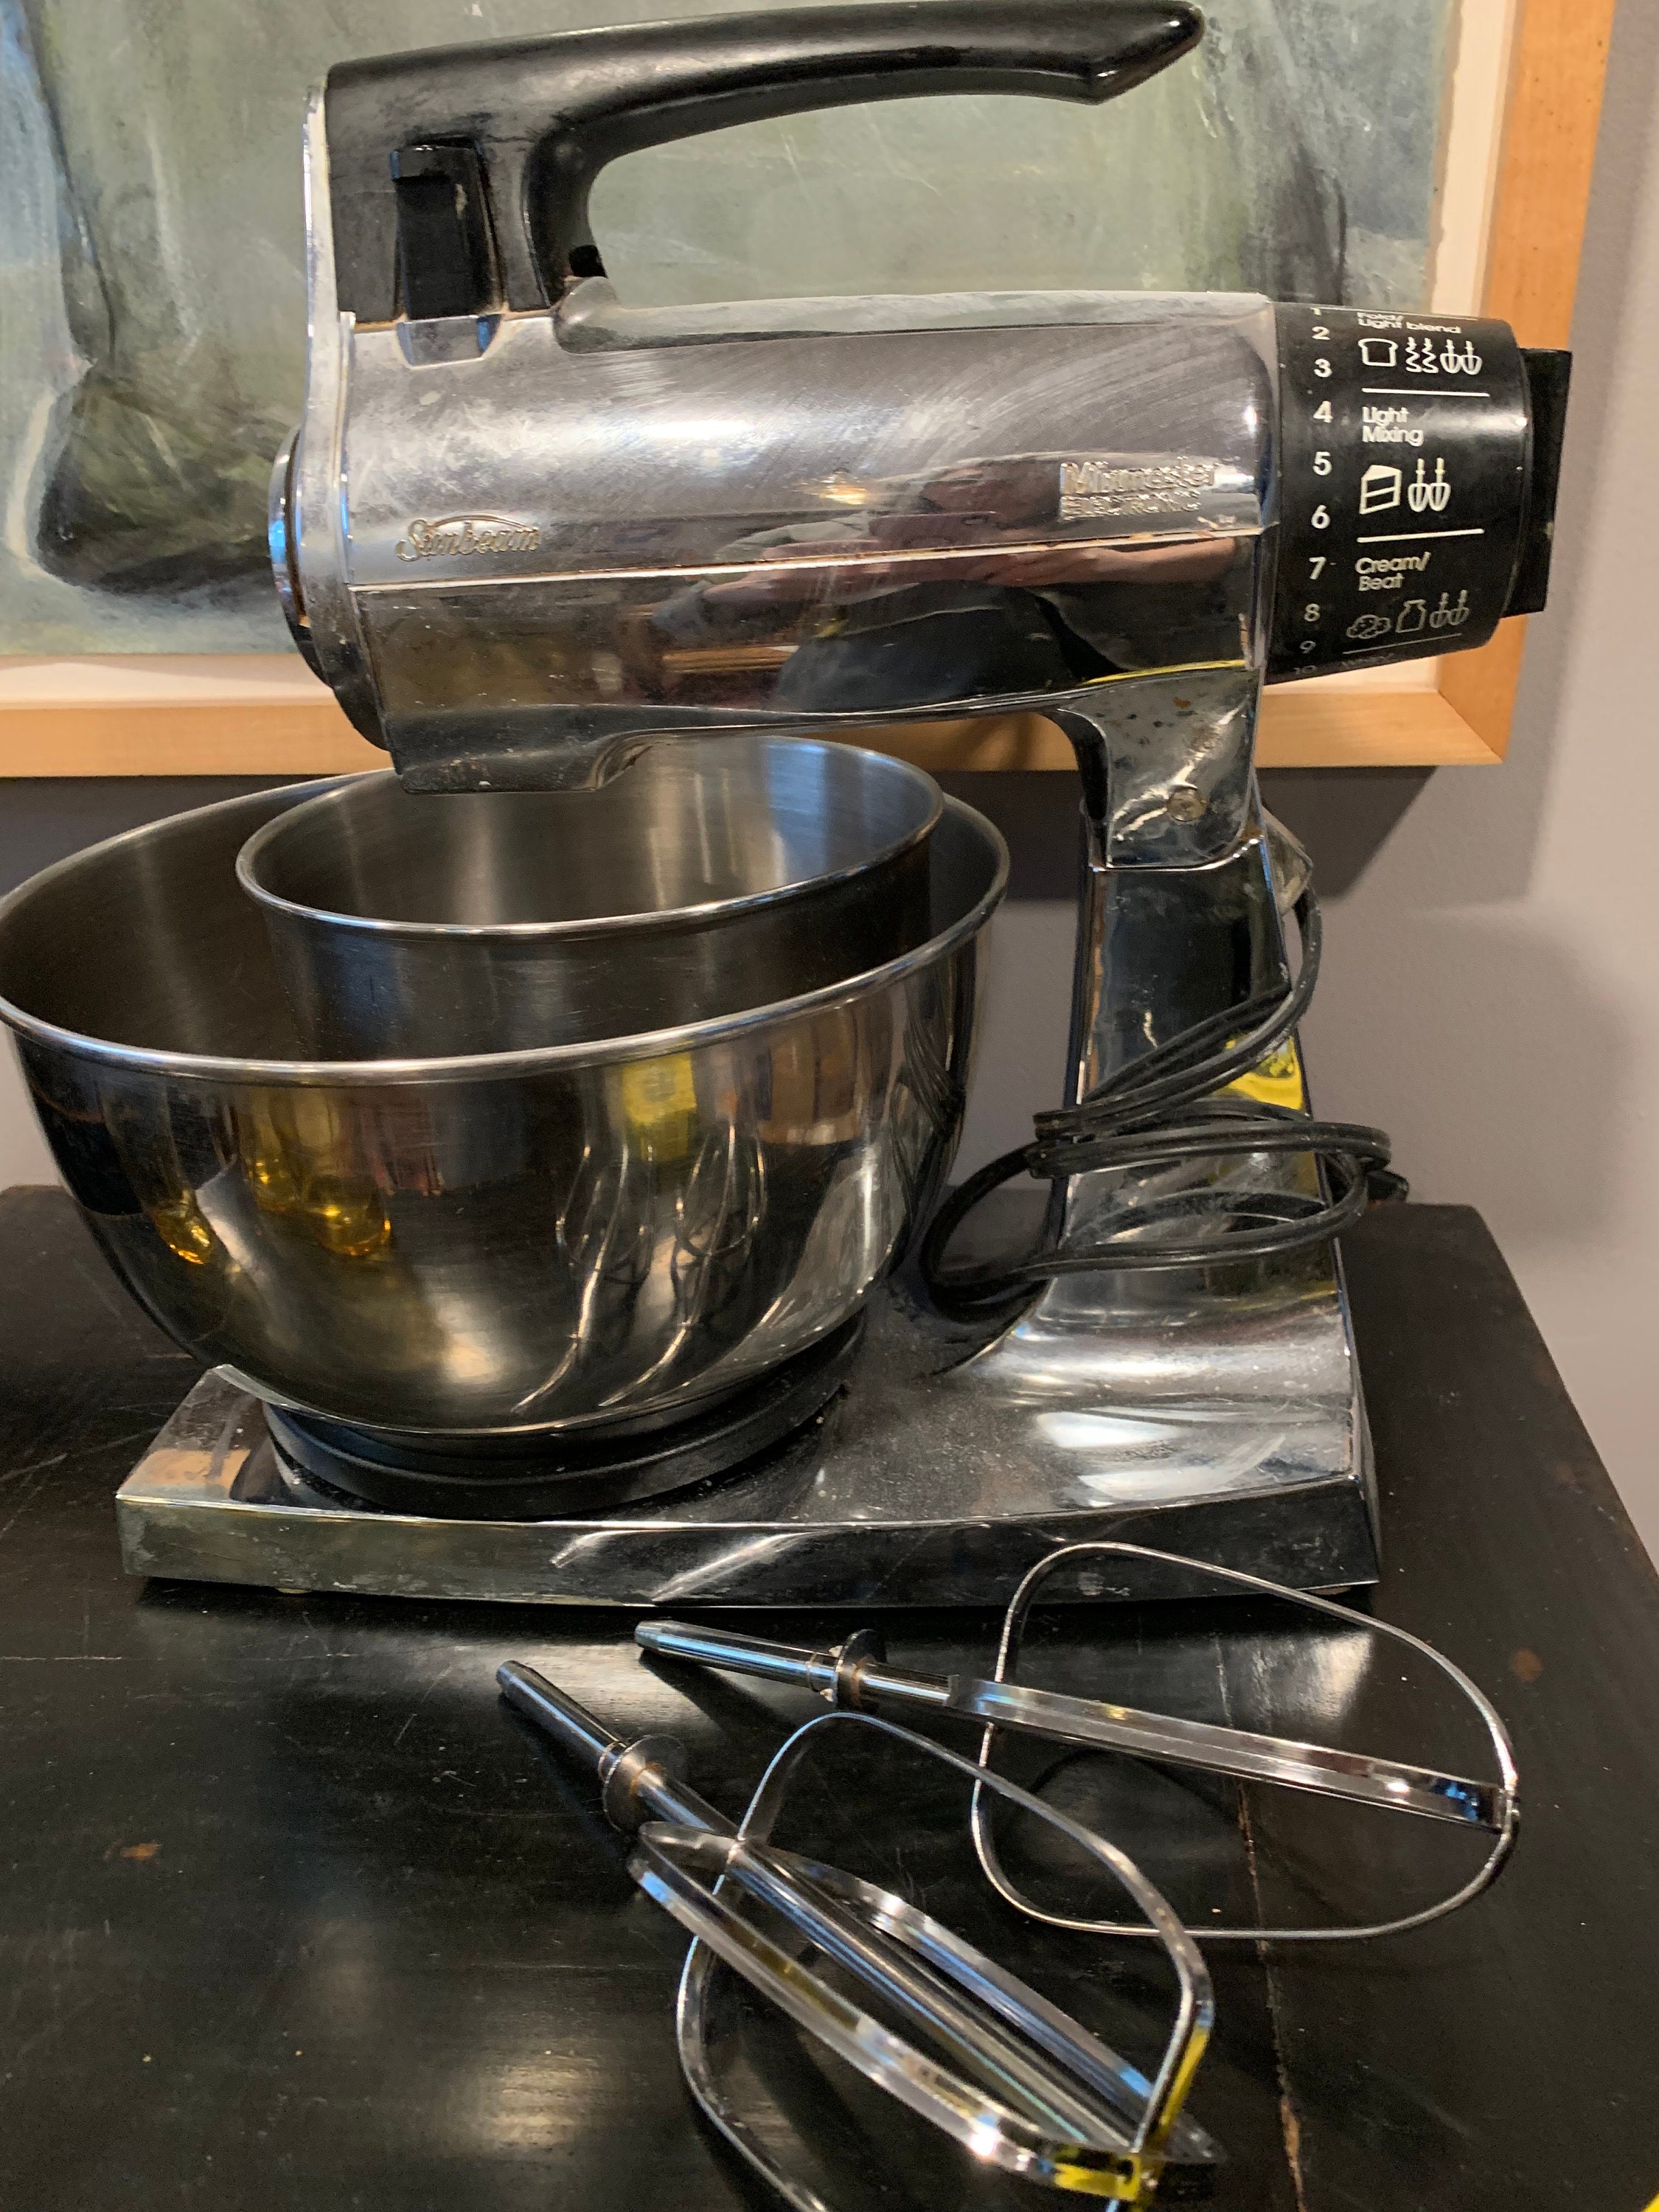 Sunbeam Mixmaster Stand Mixer, Harvest Gold, 1 Sets Beaters